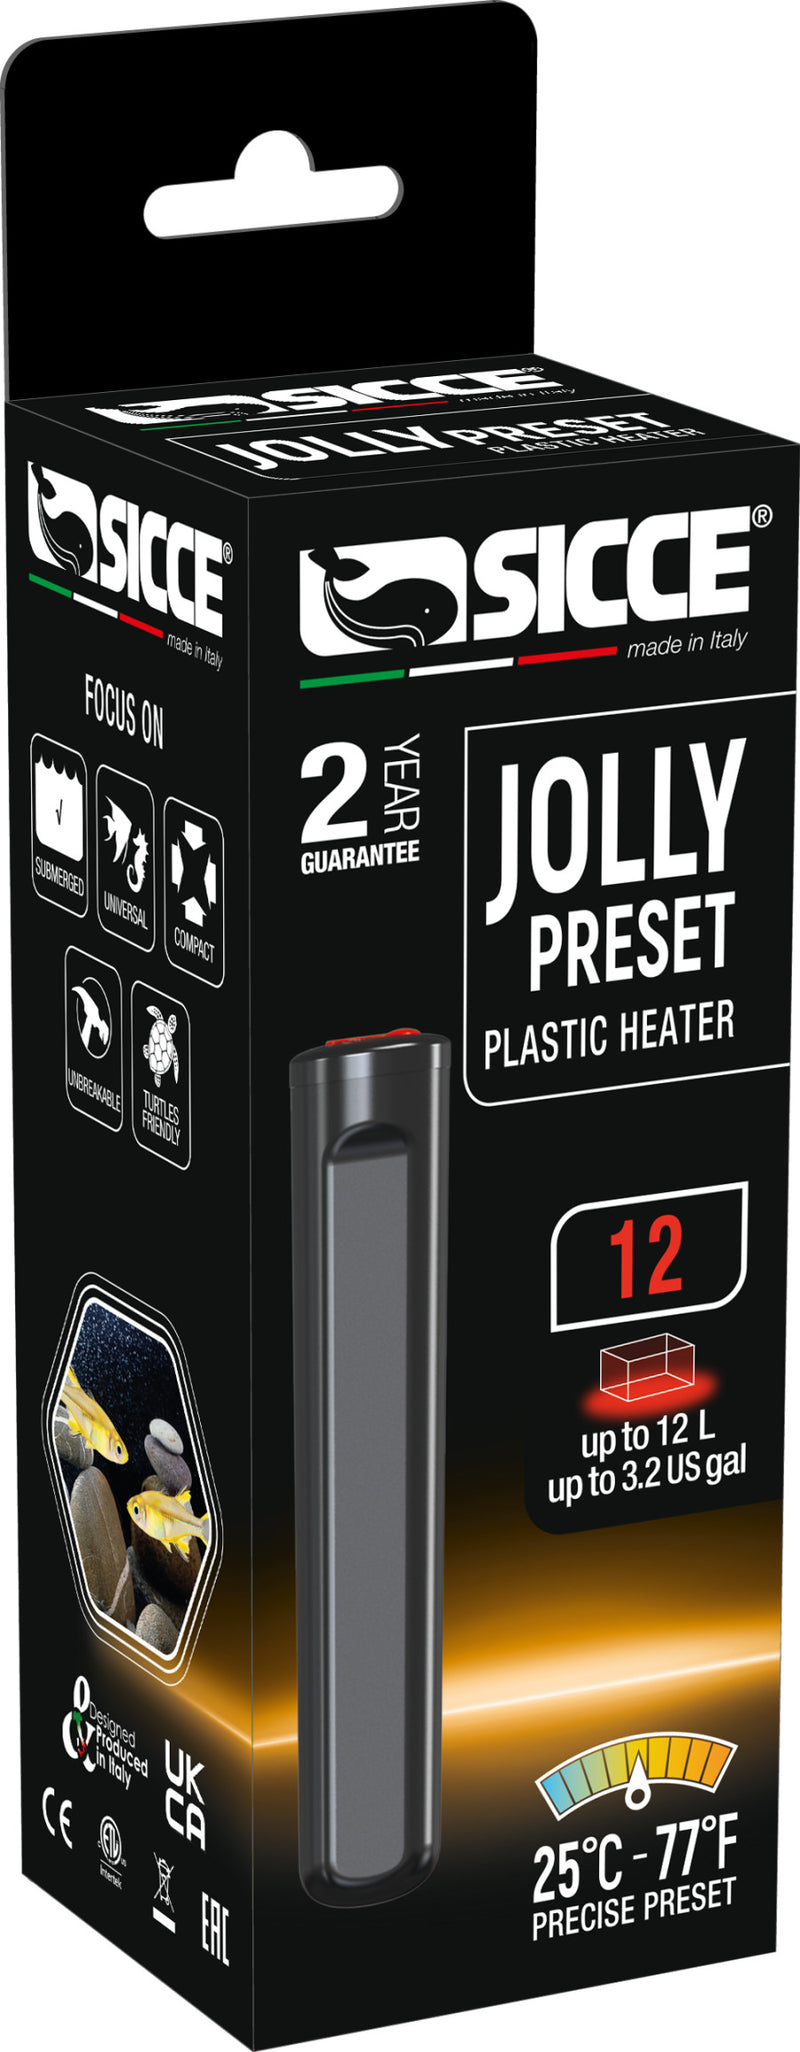 Sicce Jolly Preset Submersible Plastic Heater